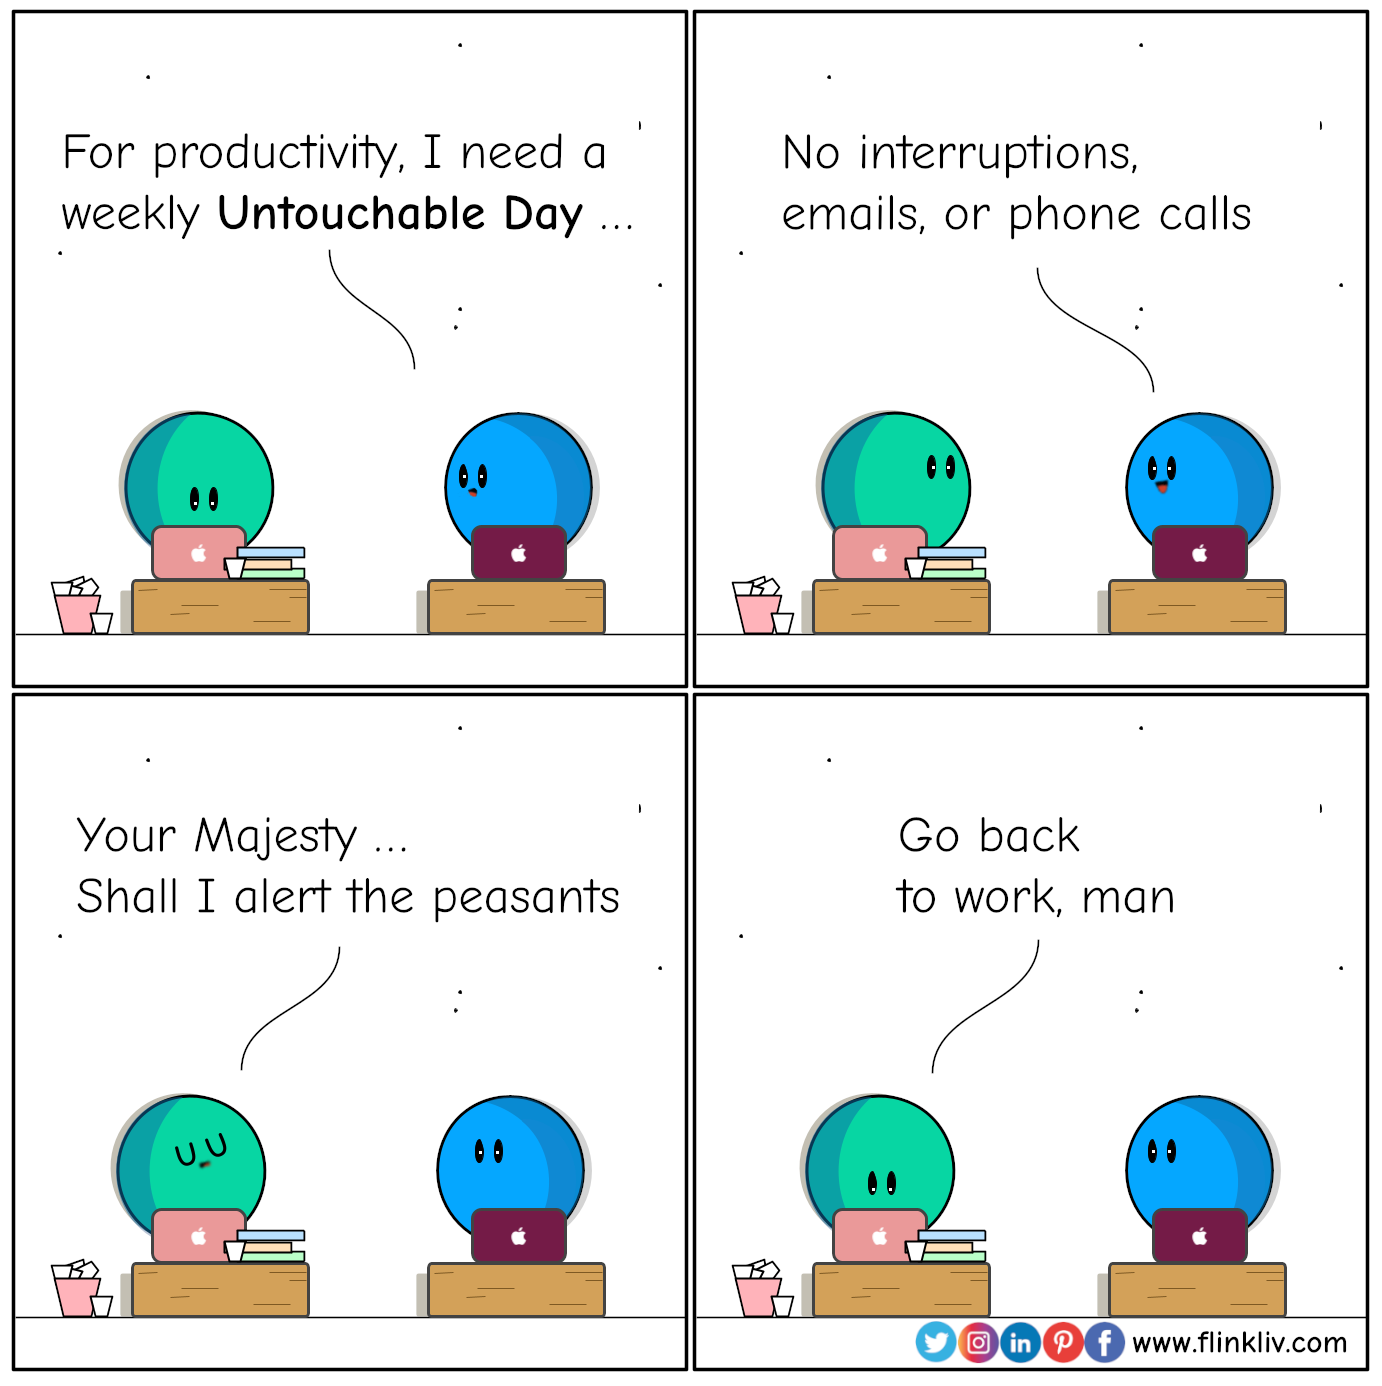 Conversation between A and B about Untouchable Day. 
				B: For productivity, I need a weekly Untouchable Day. No interruptions, emails, or phone calls
				A:  Your Majesty, shall I alert the peasants
				A: Go back to work, man.
				By flinkliv.com
            	